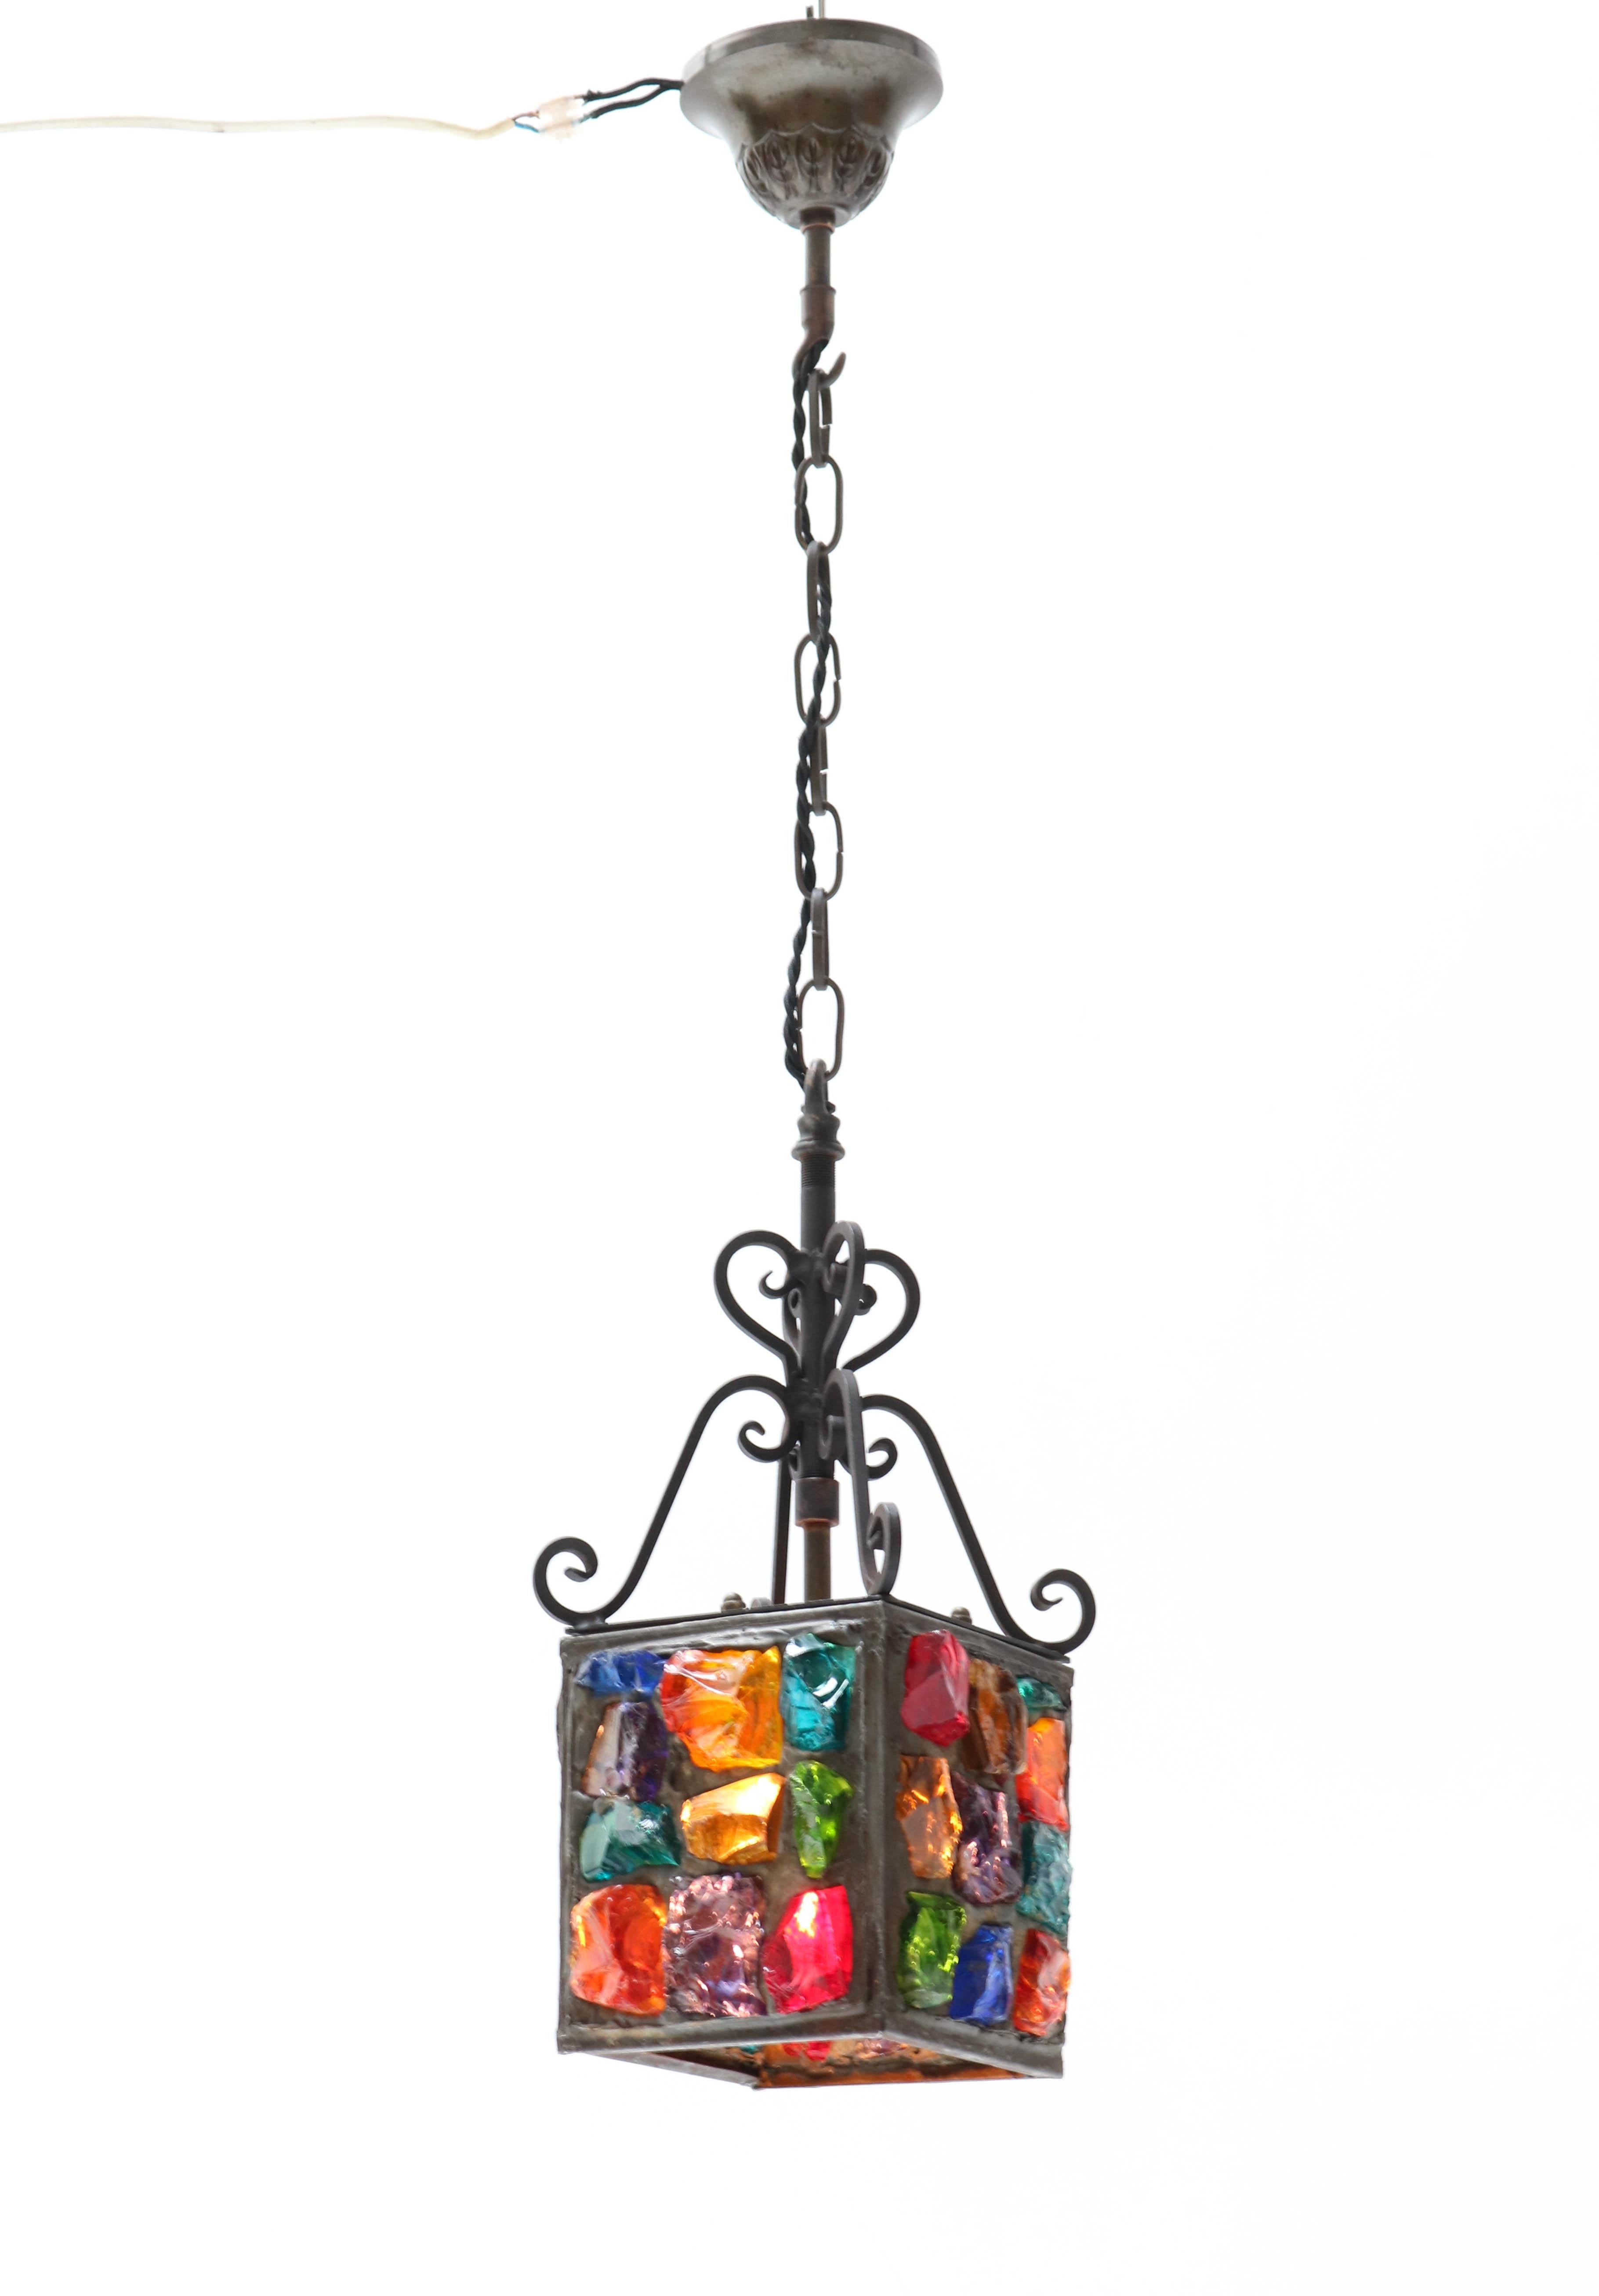 Stunning and rare Arts & Crafts Art Nouveau lantern.
Striking English design from the 1900s.
Wrought iron frame with various gemstones.
Rewired with one socket for E-27 lightbulb.
In very good condition with a beautiful patina.